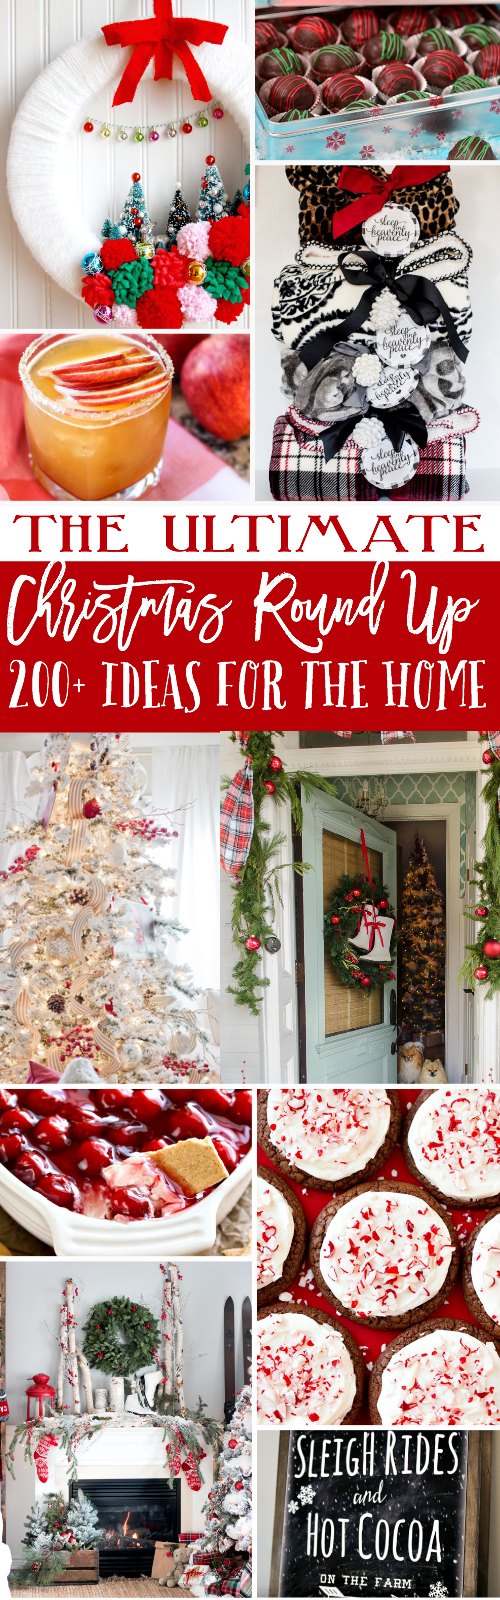 The Ultimate Christmas Round Up! Over 200+ ideas for your home's decor, gifts to make & things to bake.